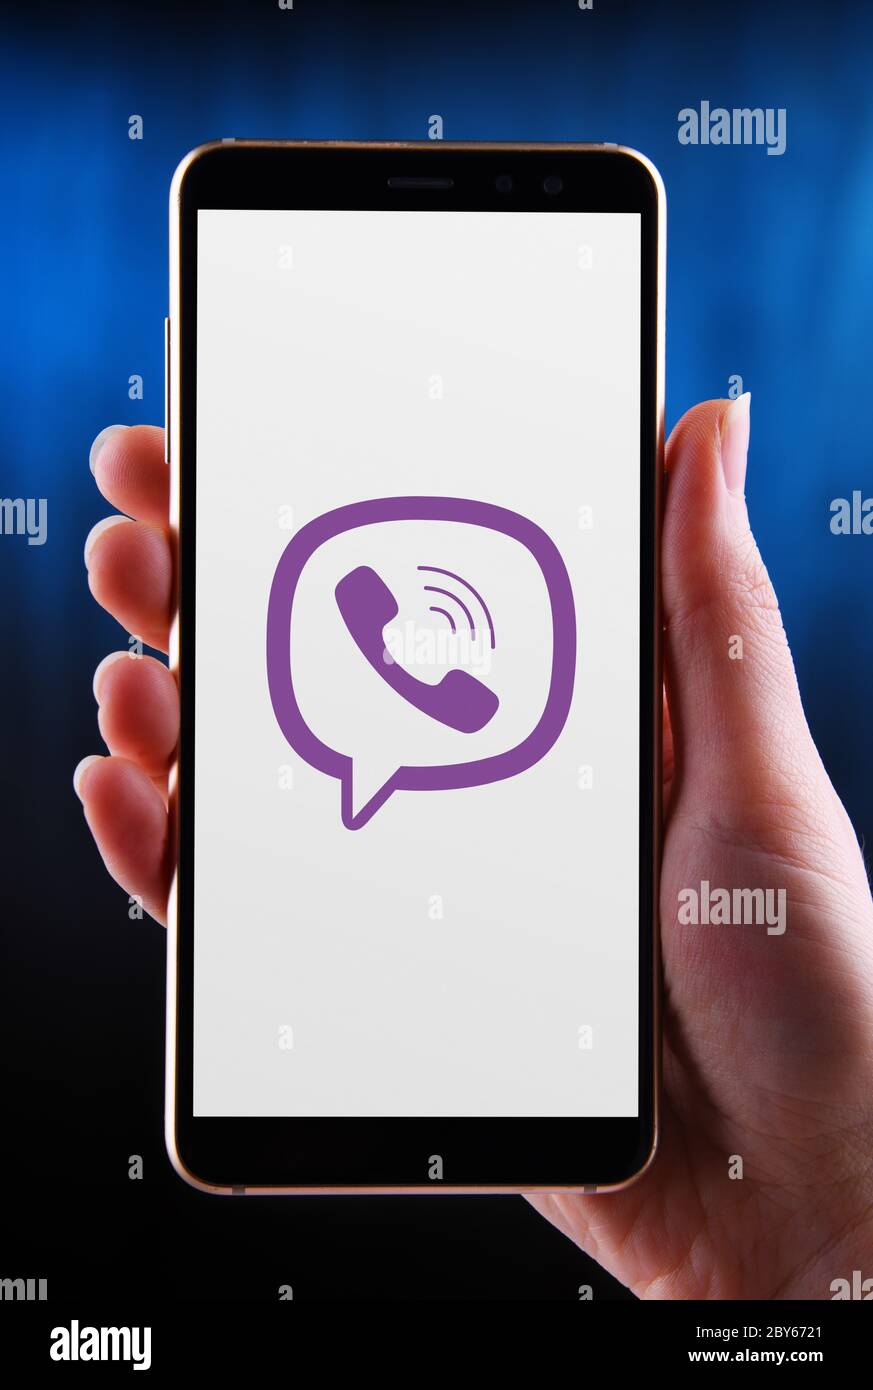 POZNAN, POL - MAY 21, 2020: Hands holding smartphone displaying logo of Viber, a cross-platform voice over IP and instant messaging software applicati Stock Photo